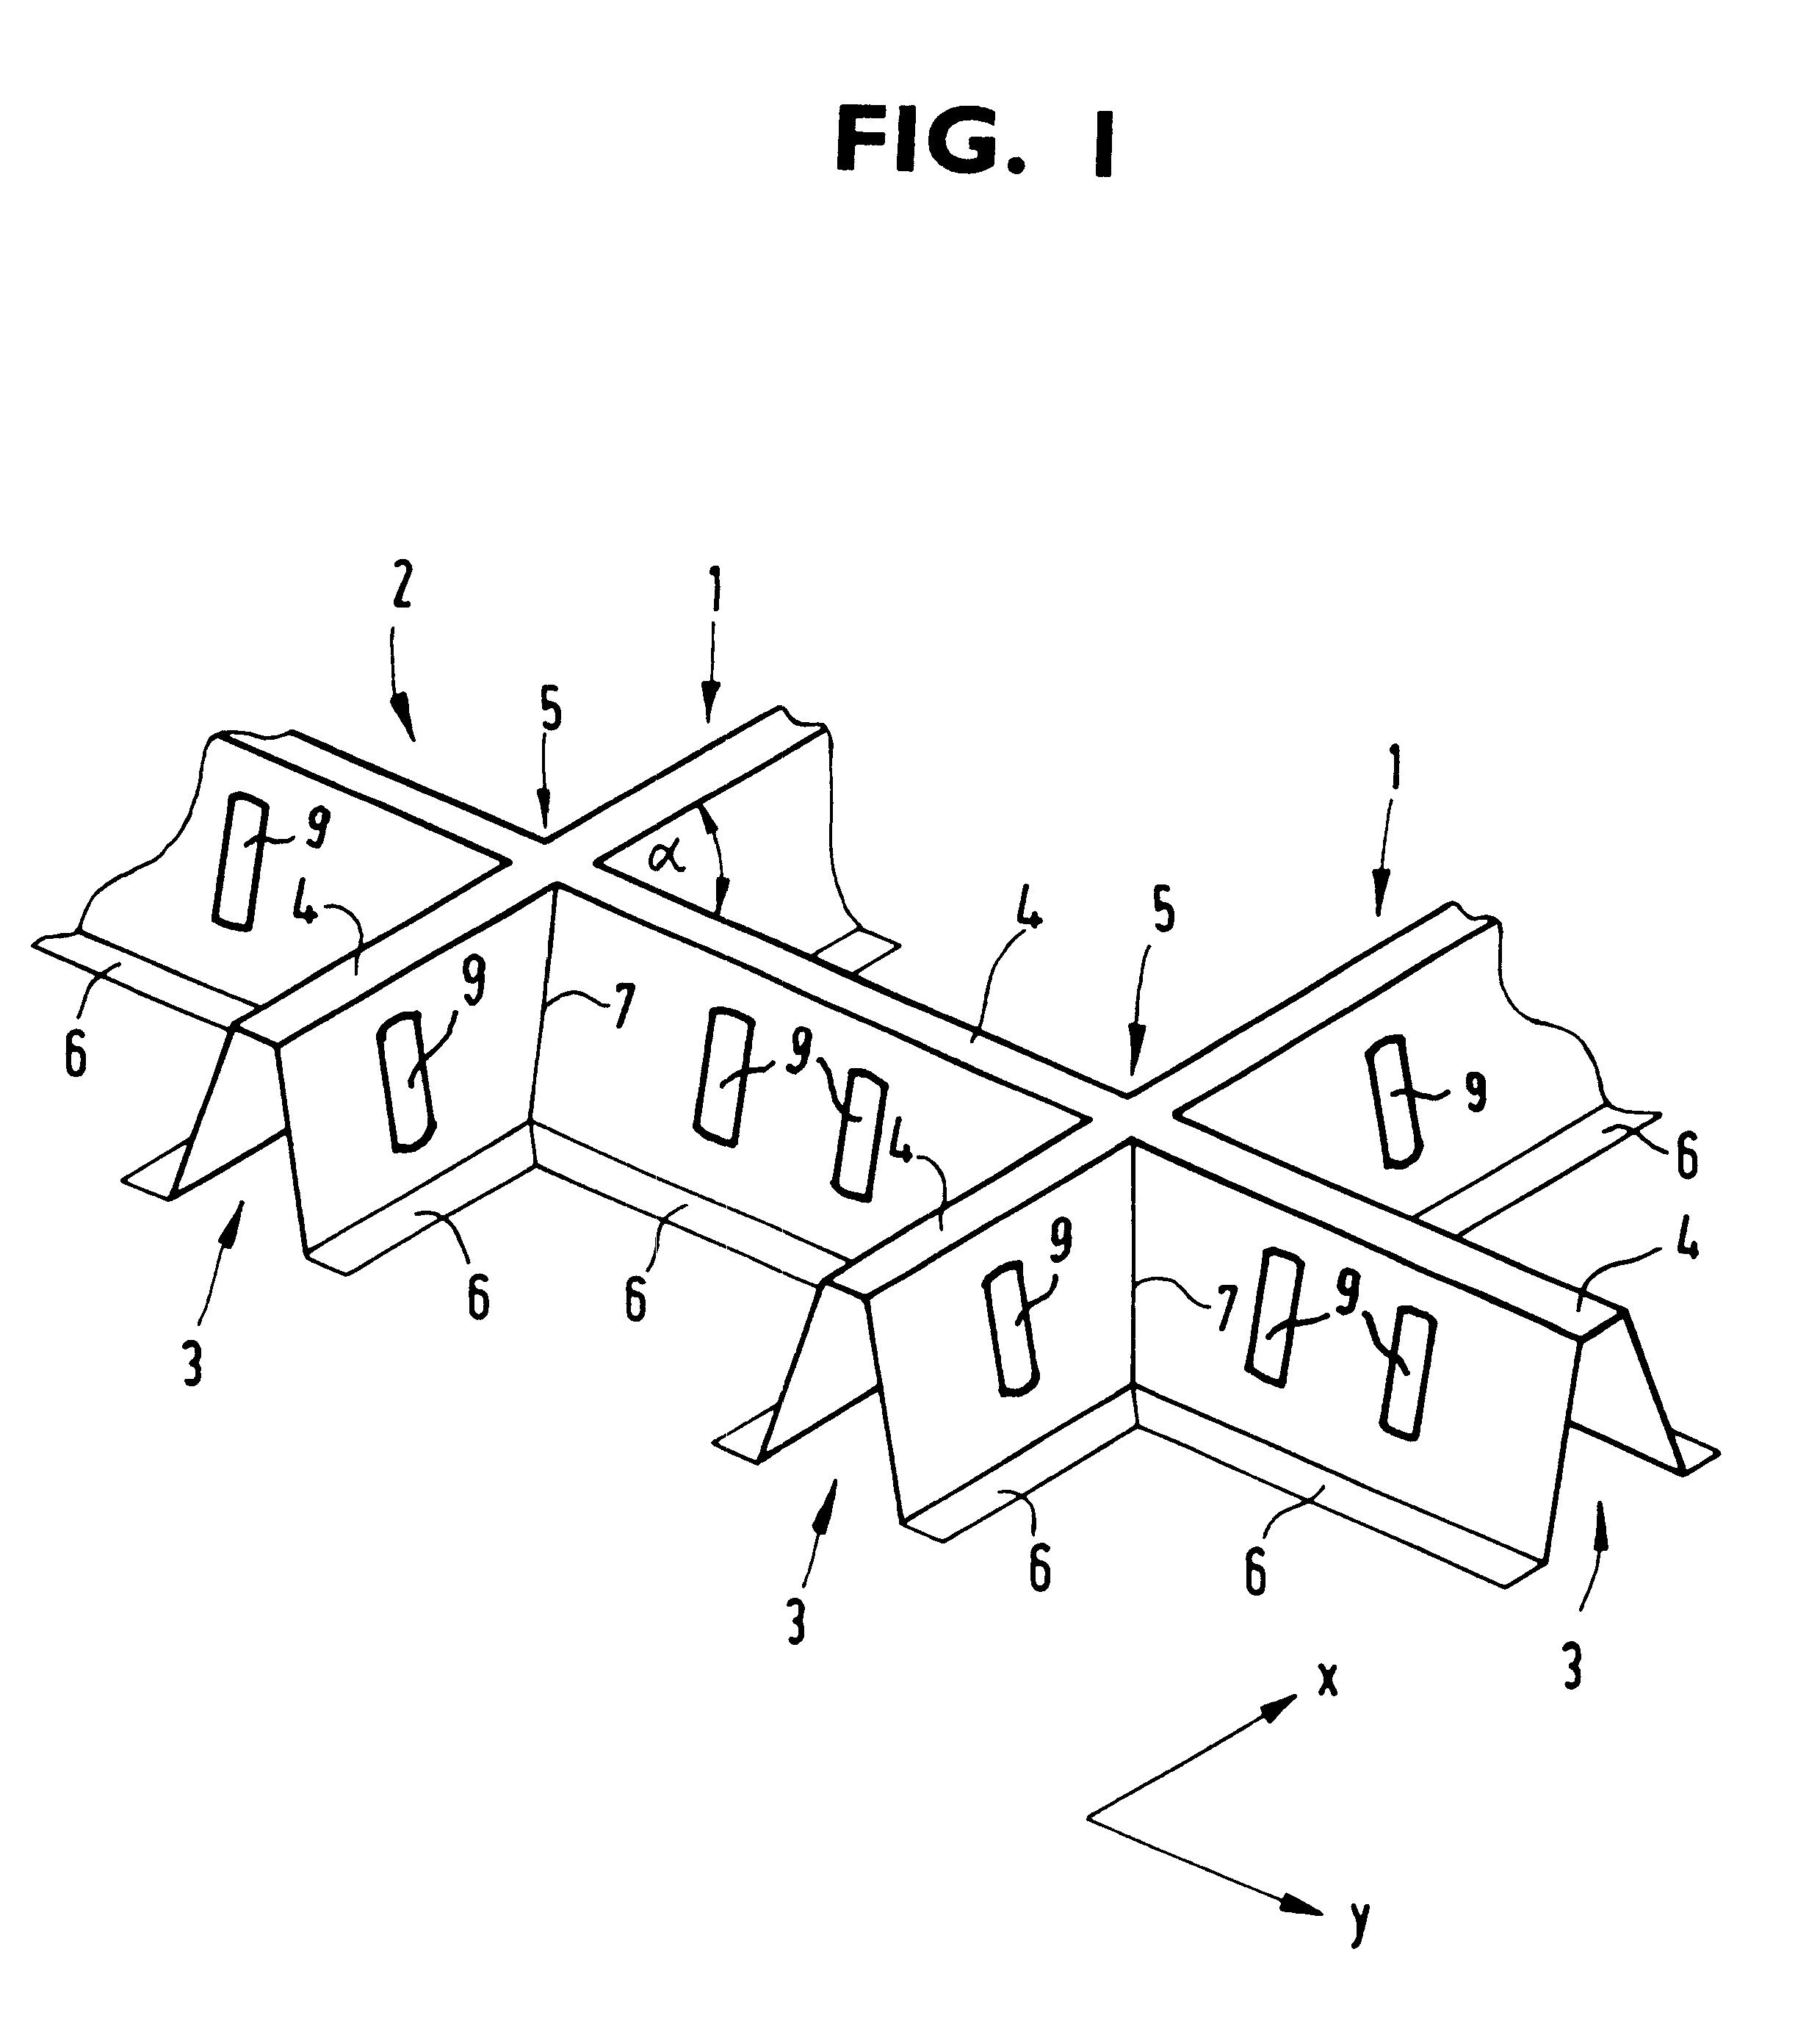 Subfloor structure of an aircraft airframe